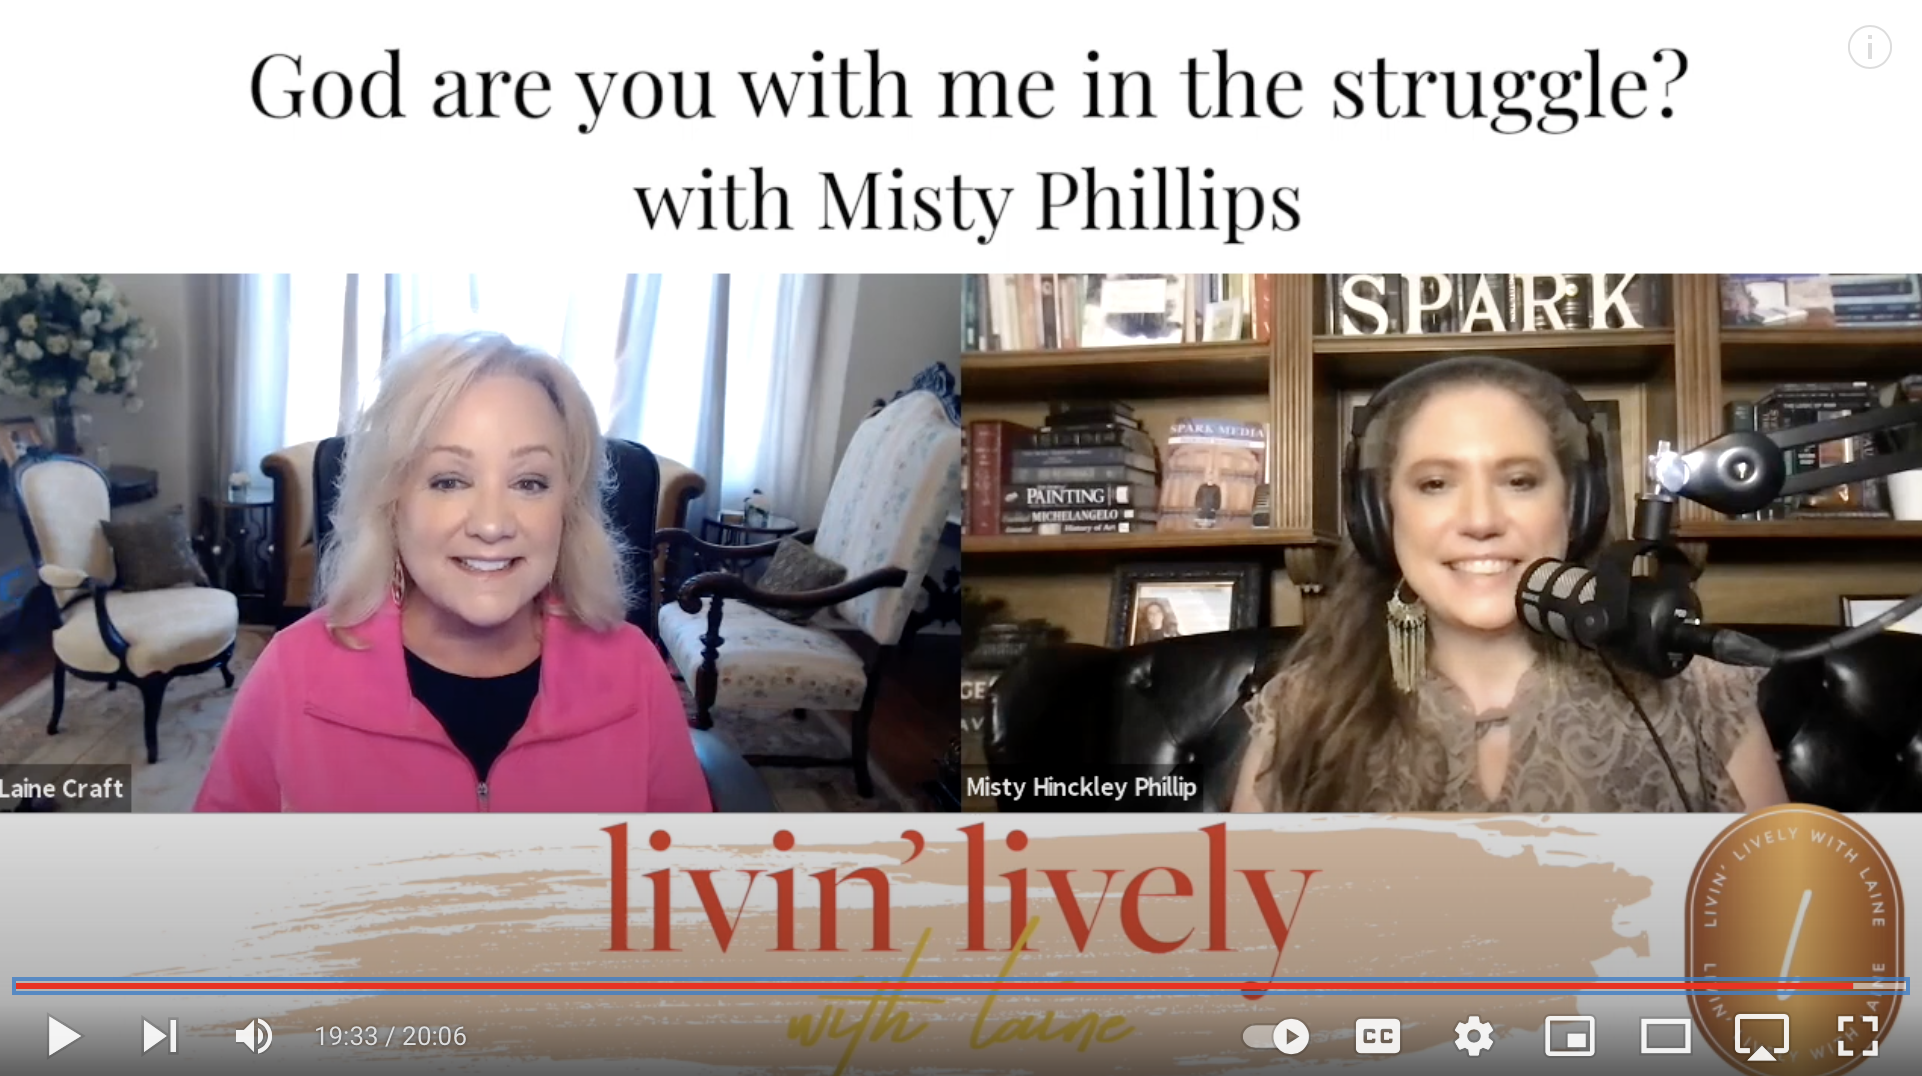 God are you with me in the struggle with Misty Phillips